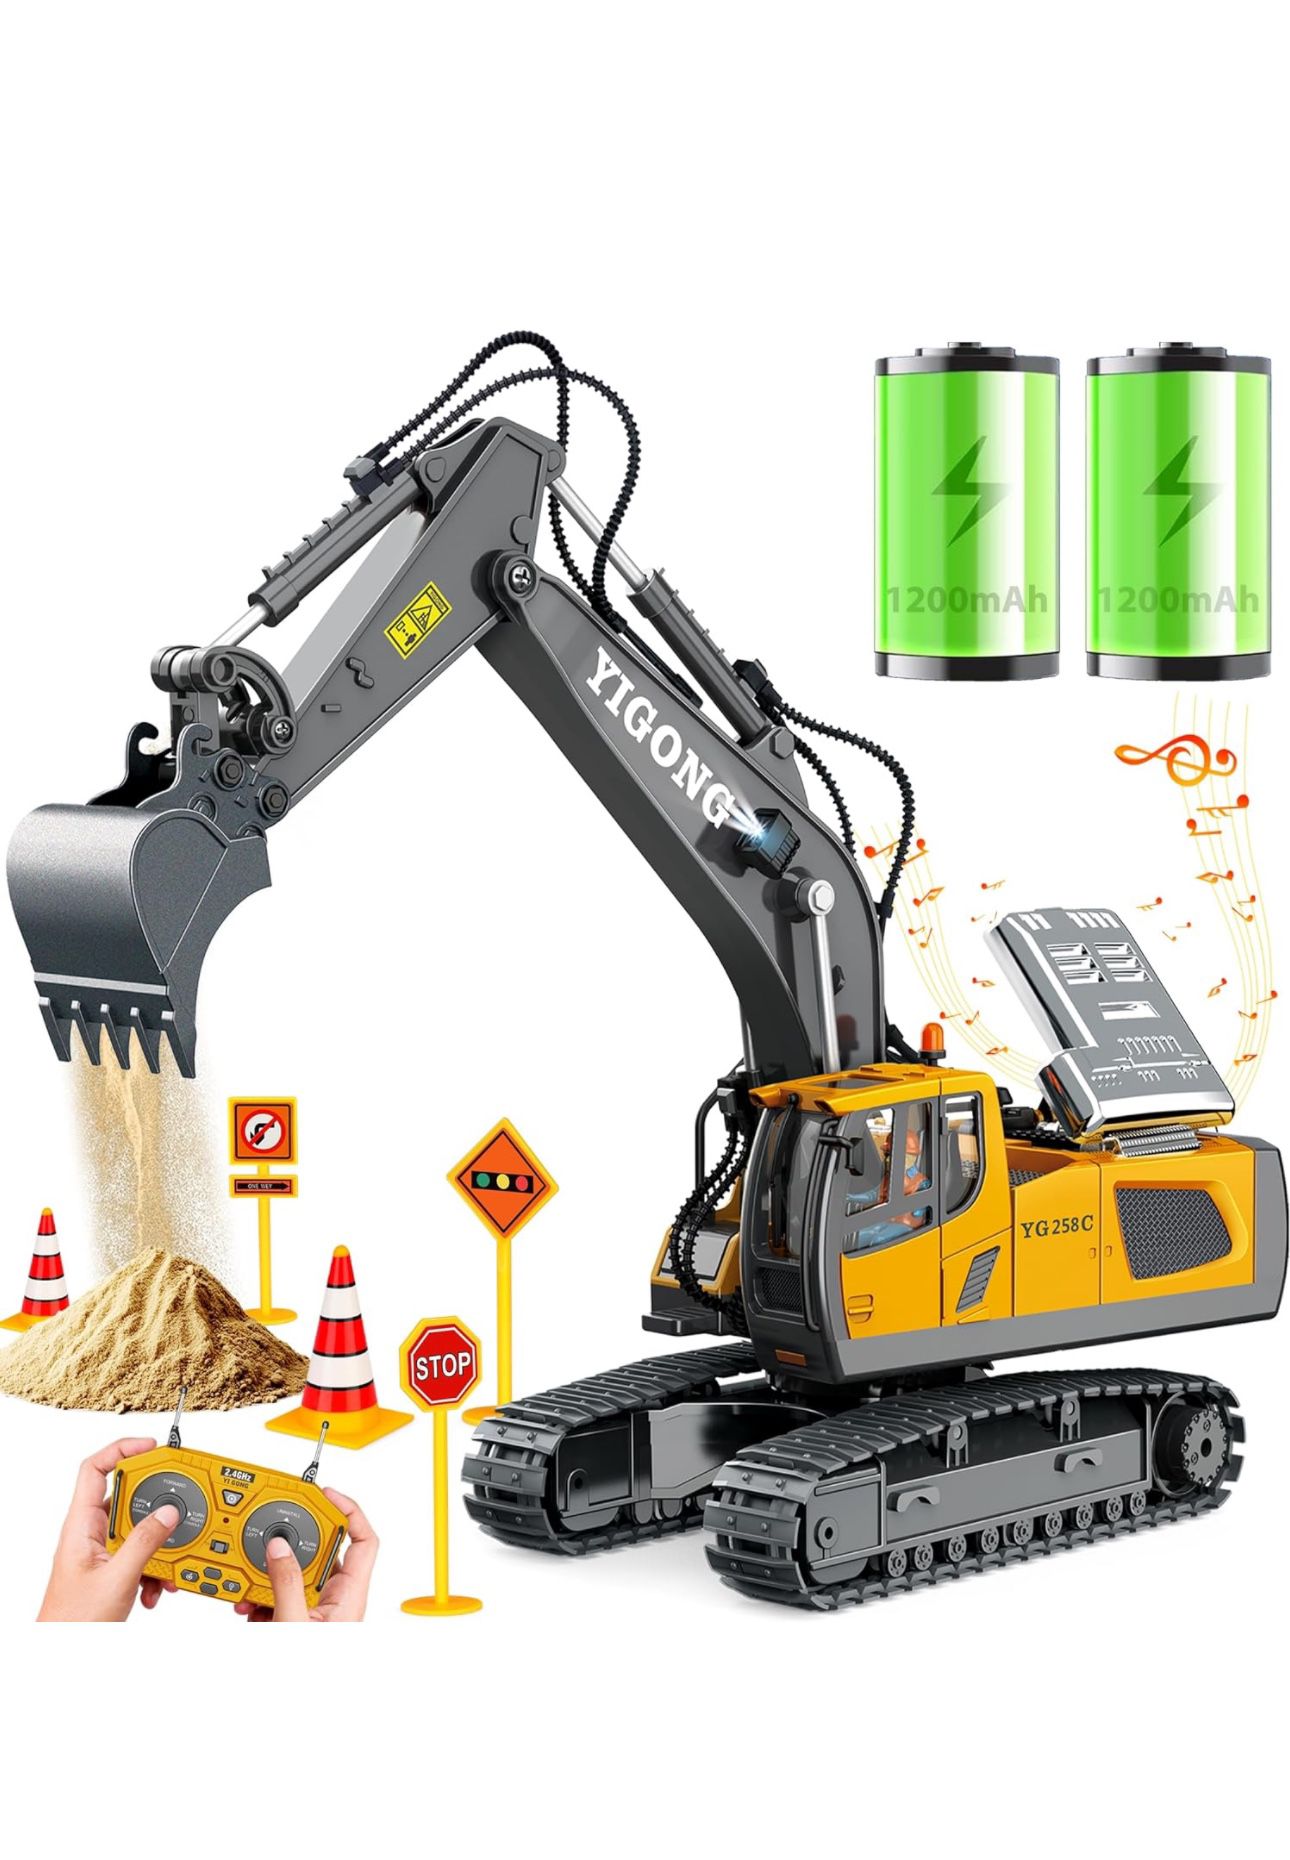 Remote Control Excavator Toys for Boys 3-5 year old, 680-degree Turns with 2 Batteries, Metal Shovel, Roadblock sign, Lights & Sounds, Construction RC